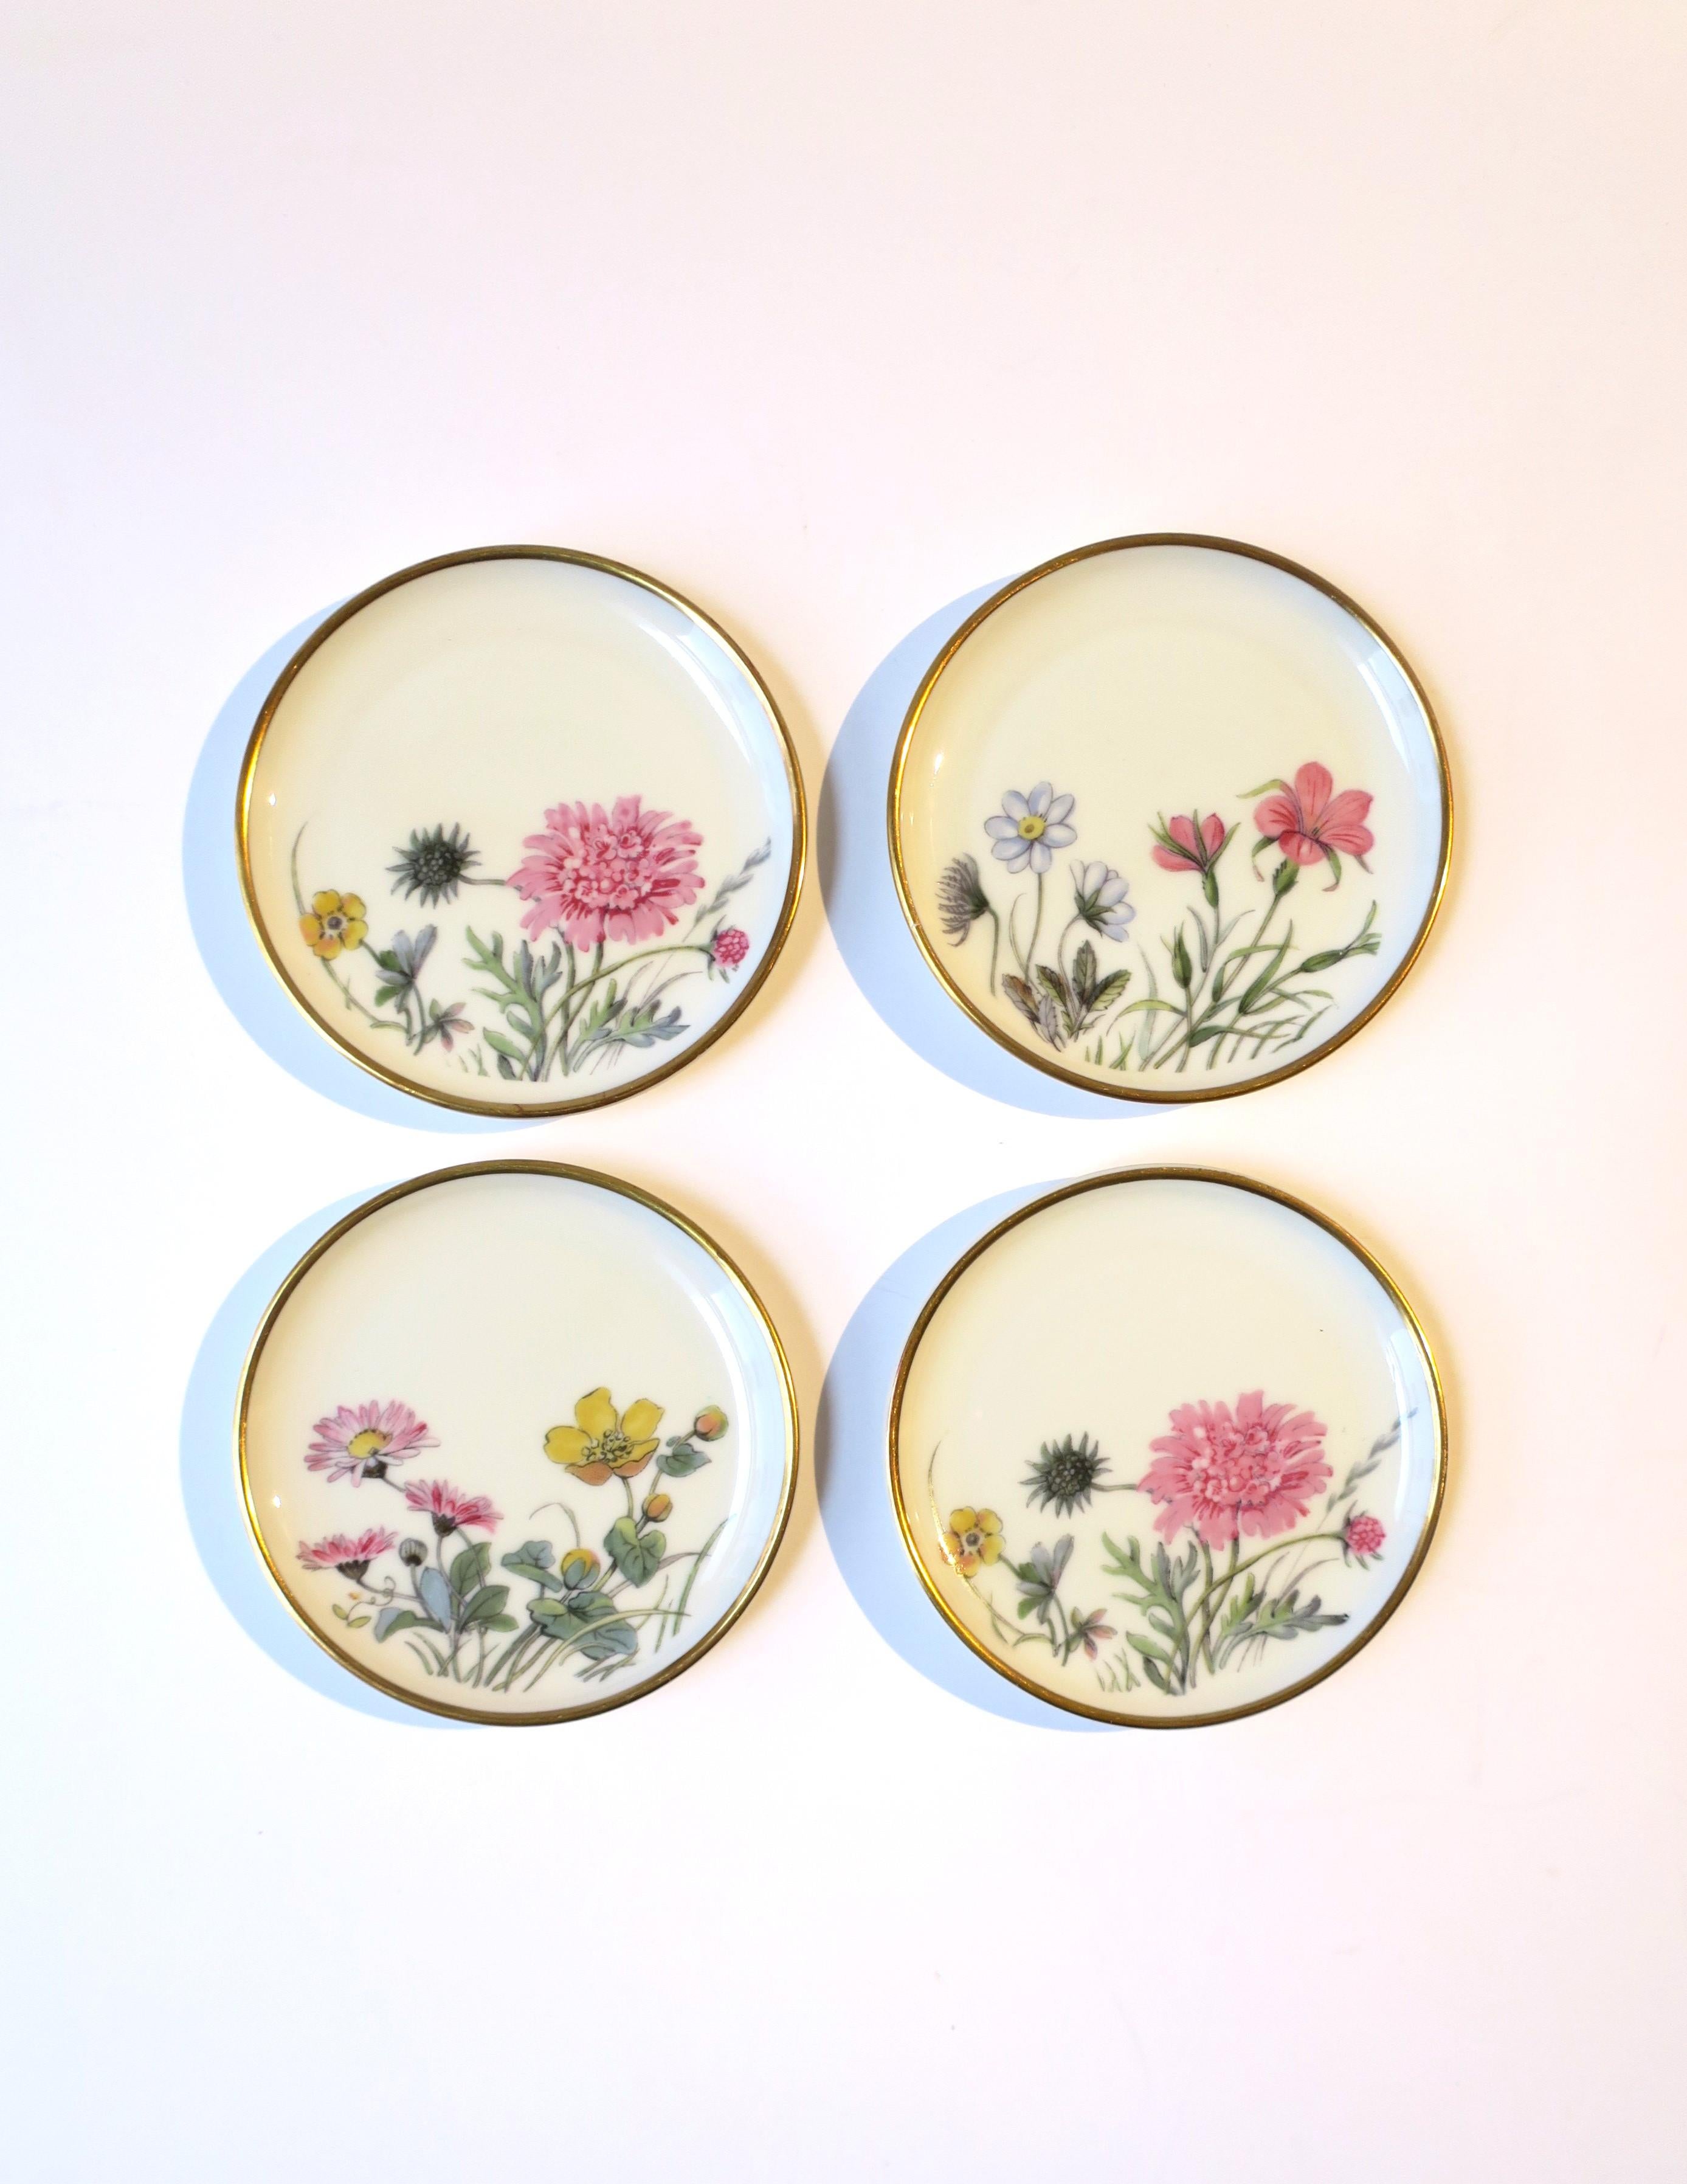 A very beautiful set of four (4) German off-white porcelain cocktail drinks coasters with botanical design and gold trimmed edge, circa mid-20th century, Germany. Colors include pink, yellow, blue, green, and gold. A beautiful set and essential for